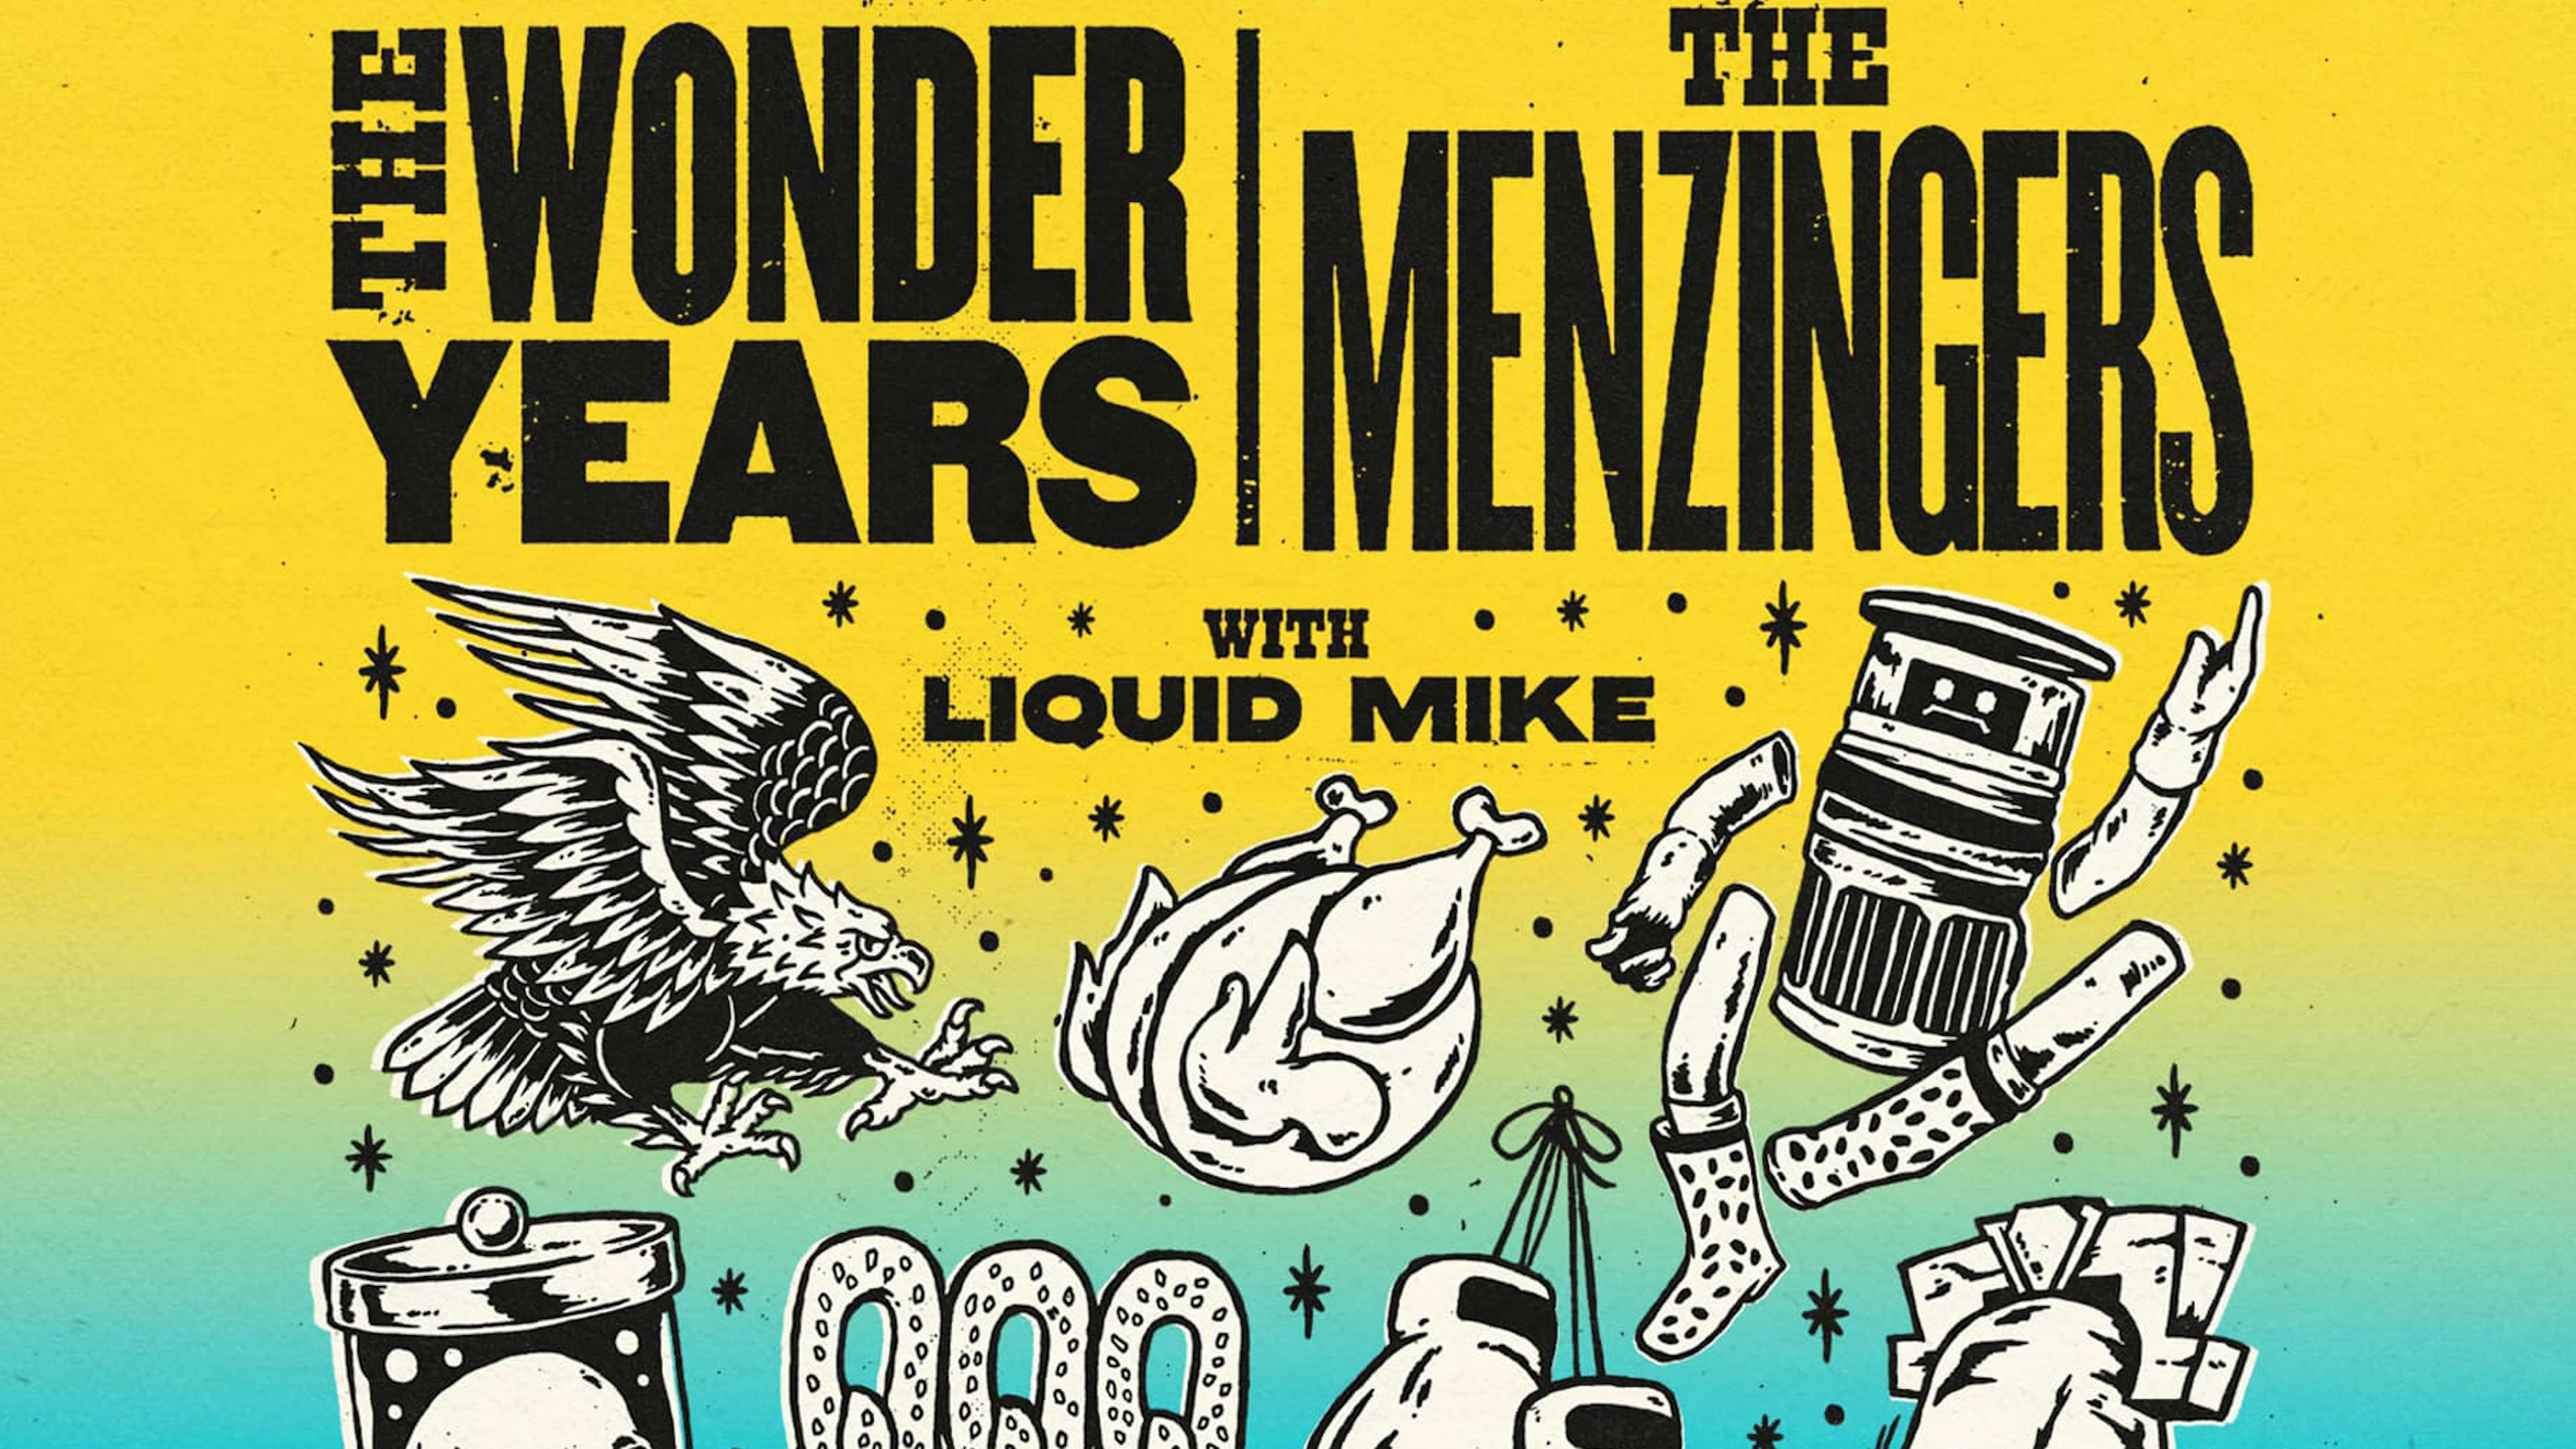 The Wonder Years and The Menzingers announce U.S tour